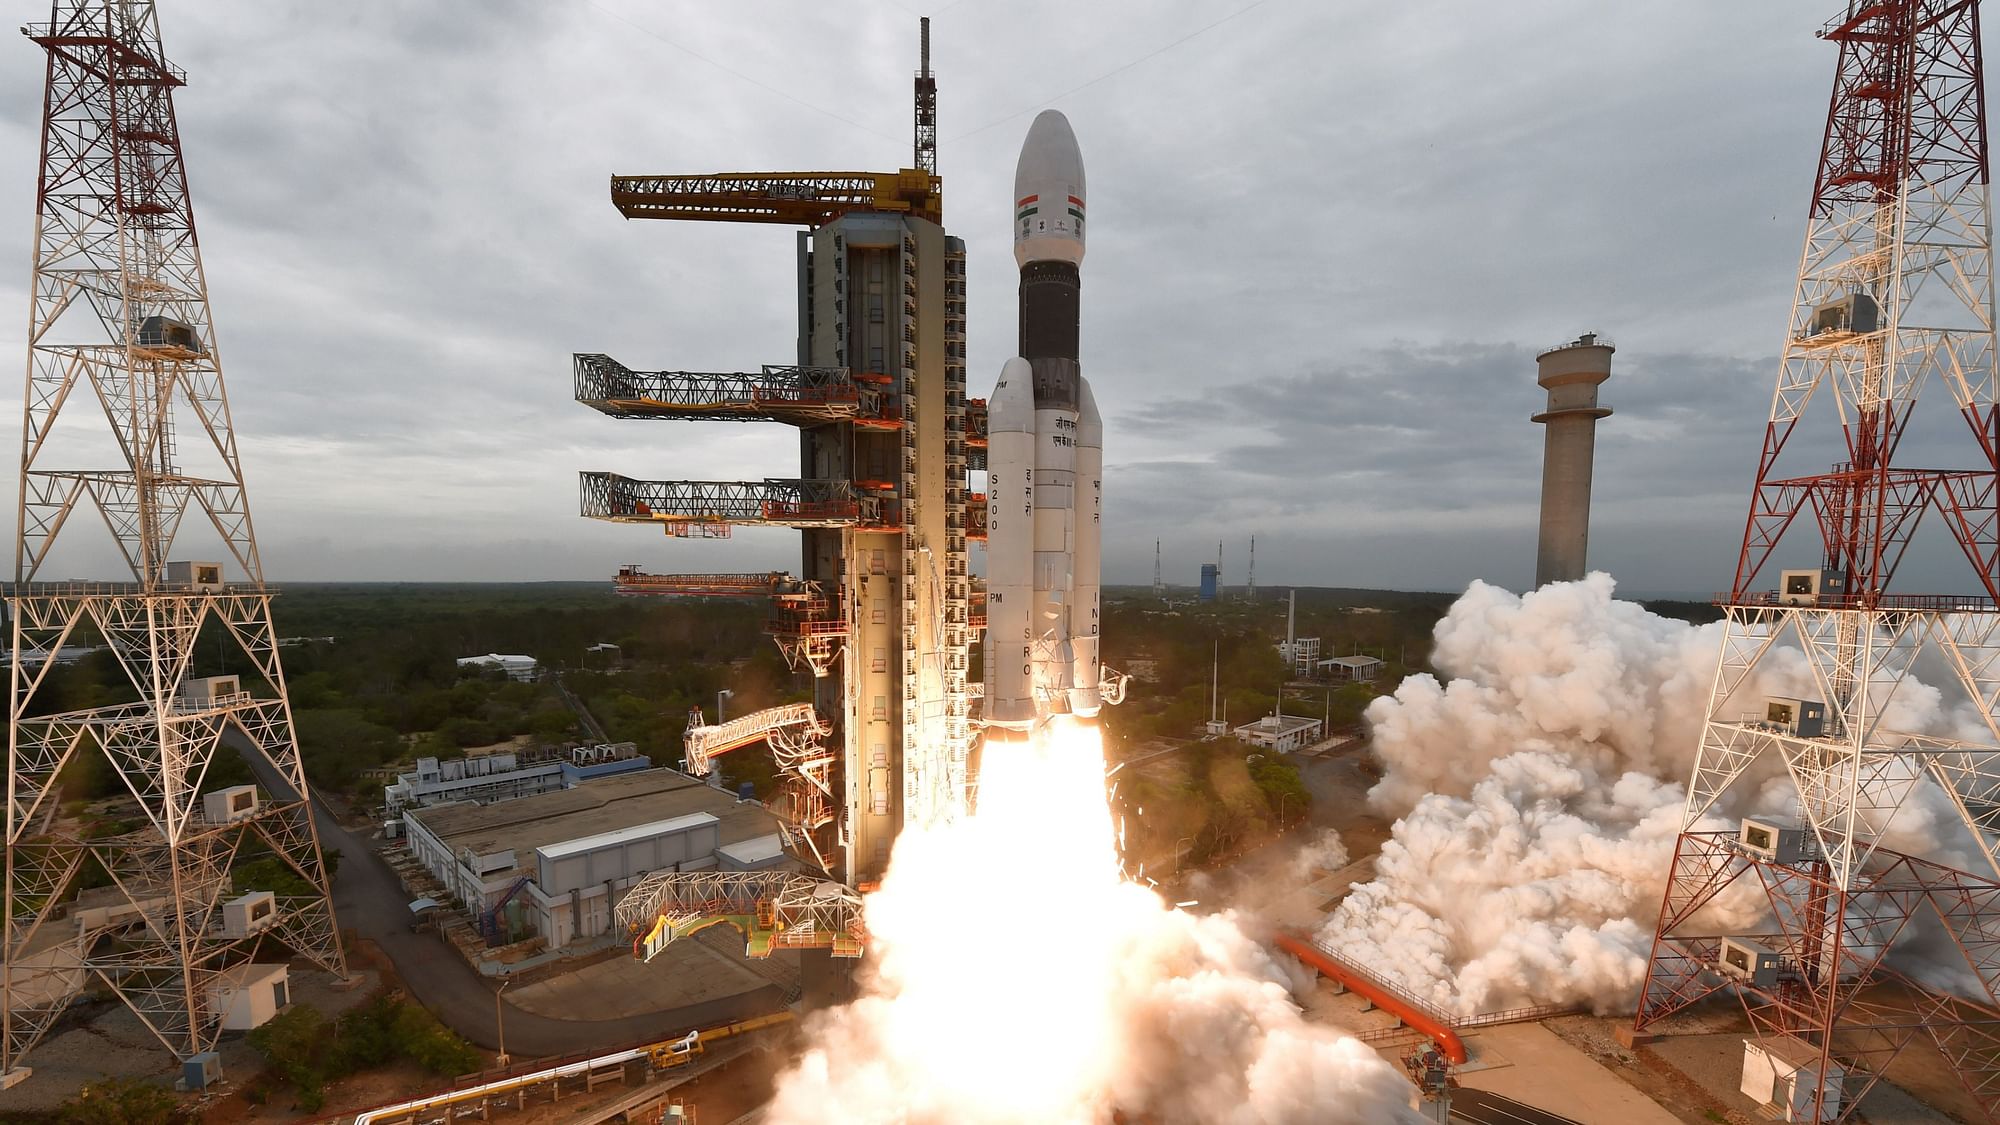 ISRO launched India’s second moon mission, Chandrayaan-2 successfully on Monday, 22 July.